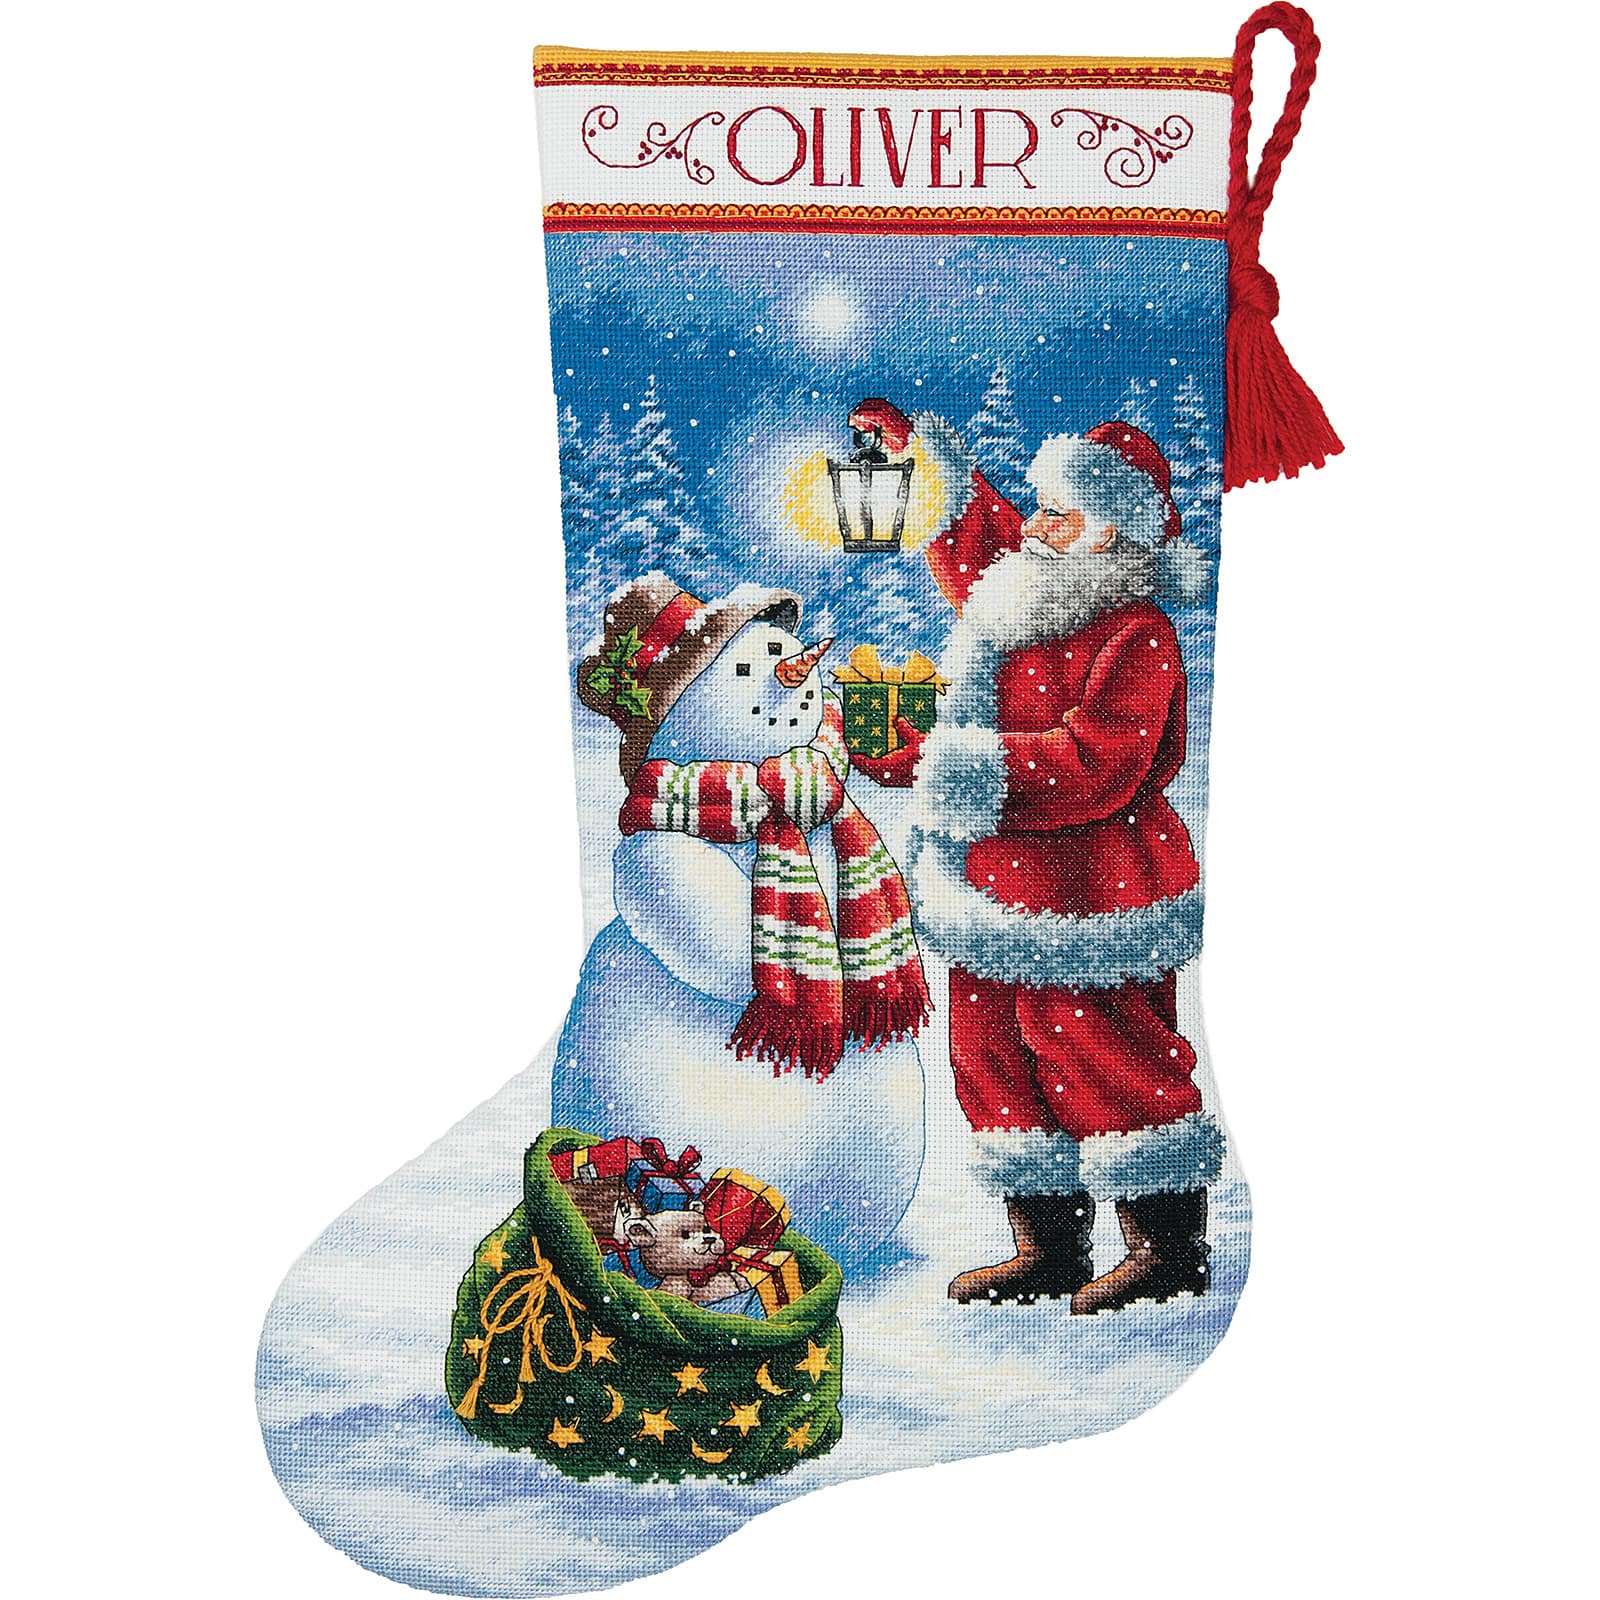 A needlepoint Christmas stocking kit that features red and white